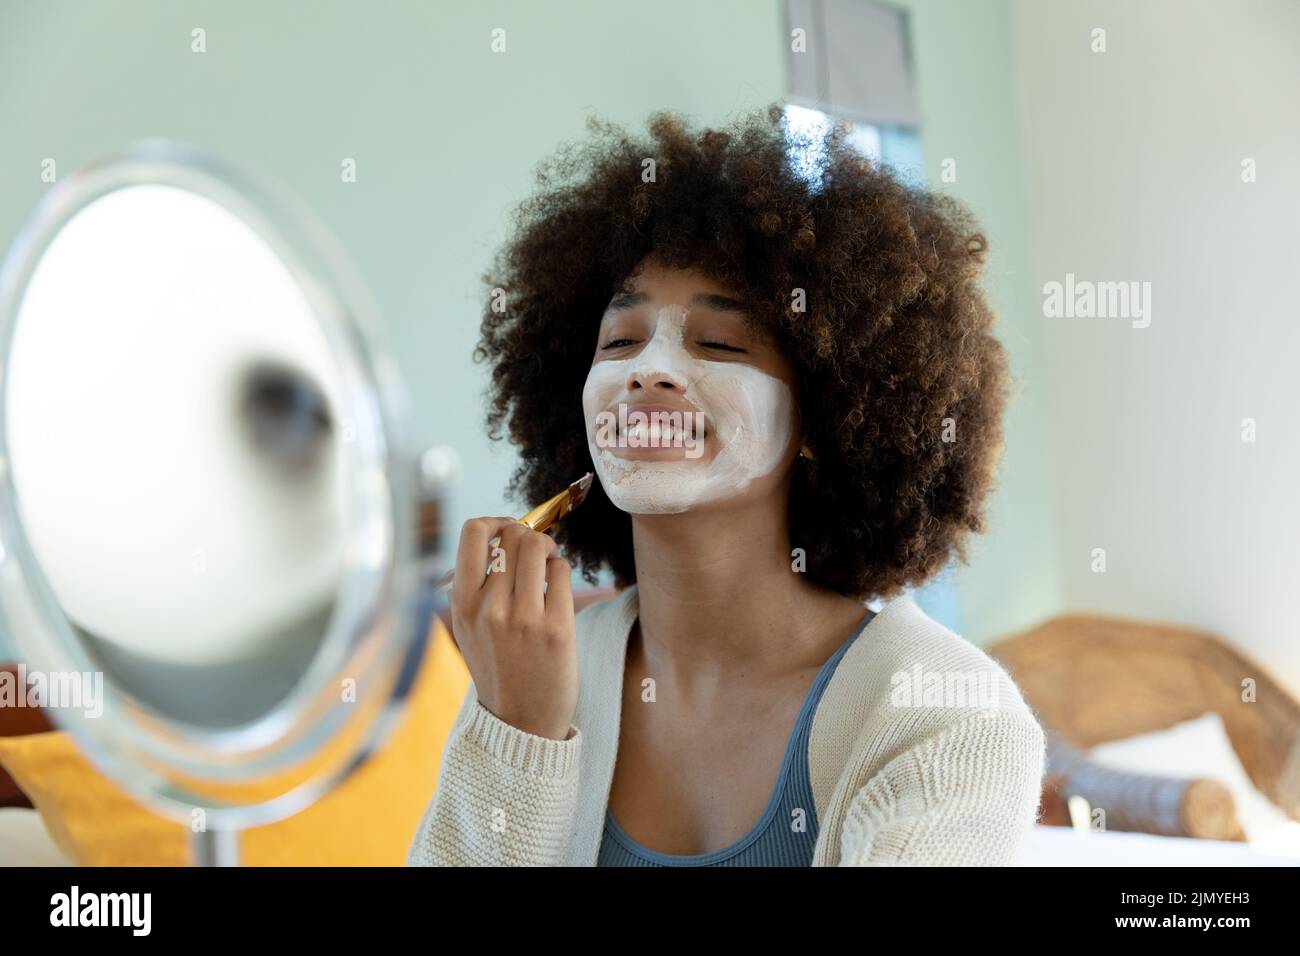 Smiling young biracial woman with afro hair applying beauty cream on face while looking at mirror Stock Photo